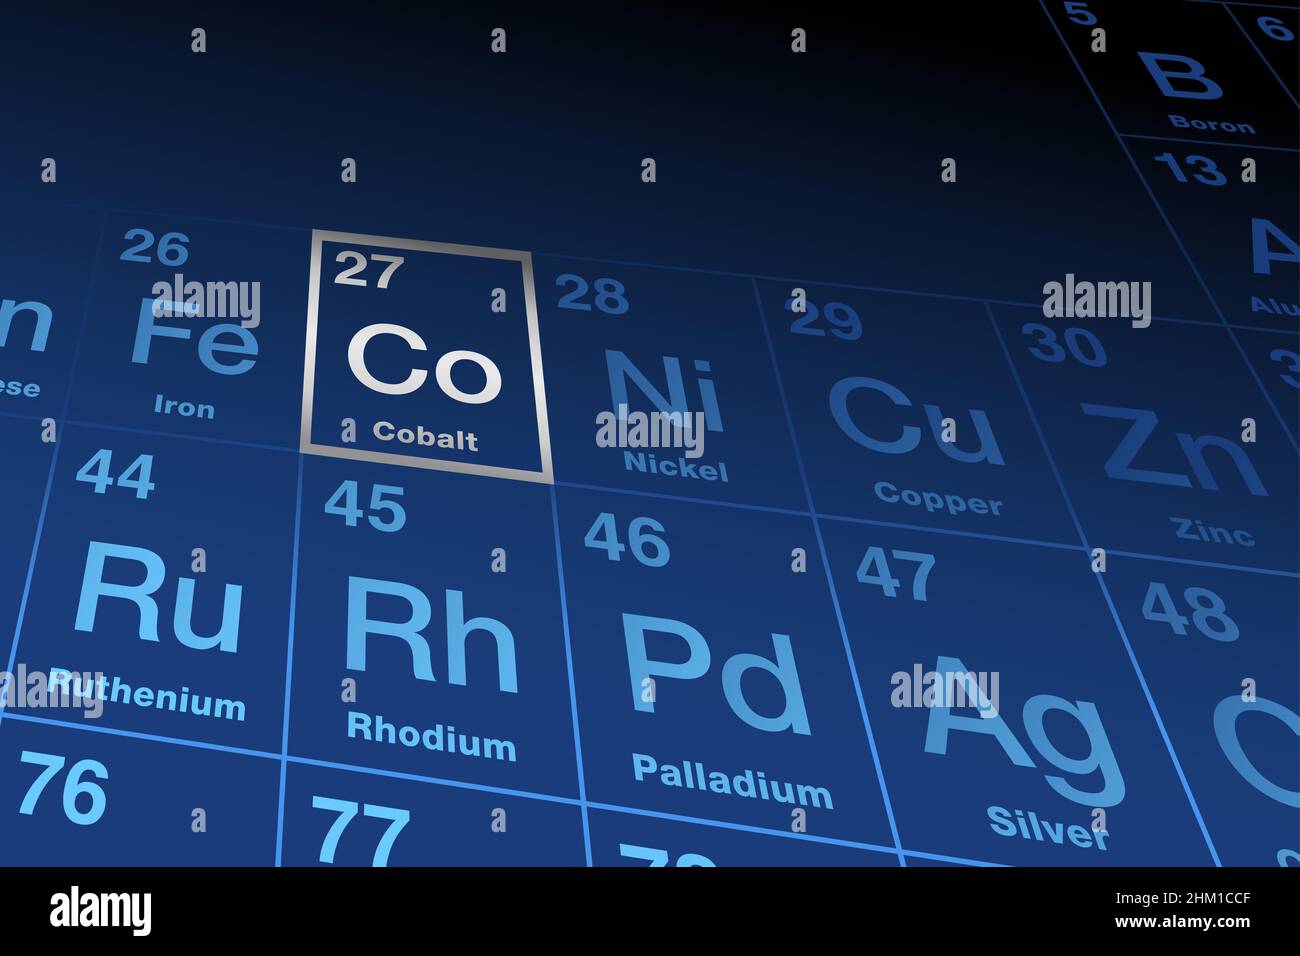 Element cobalt on the periodic table of elements. Ferromagnetic transition metal, with element symbol Co, and atomic number 27. Stock Photo